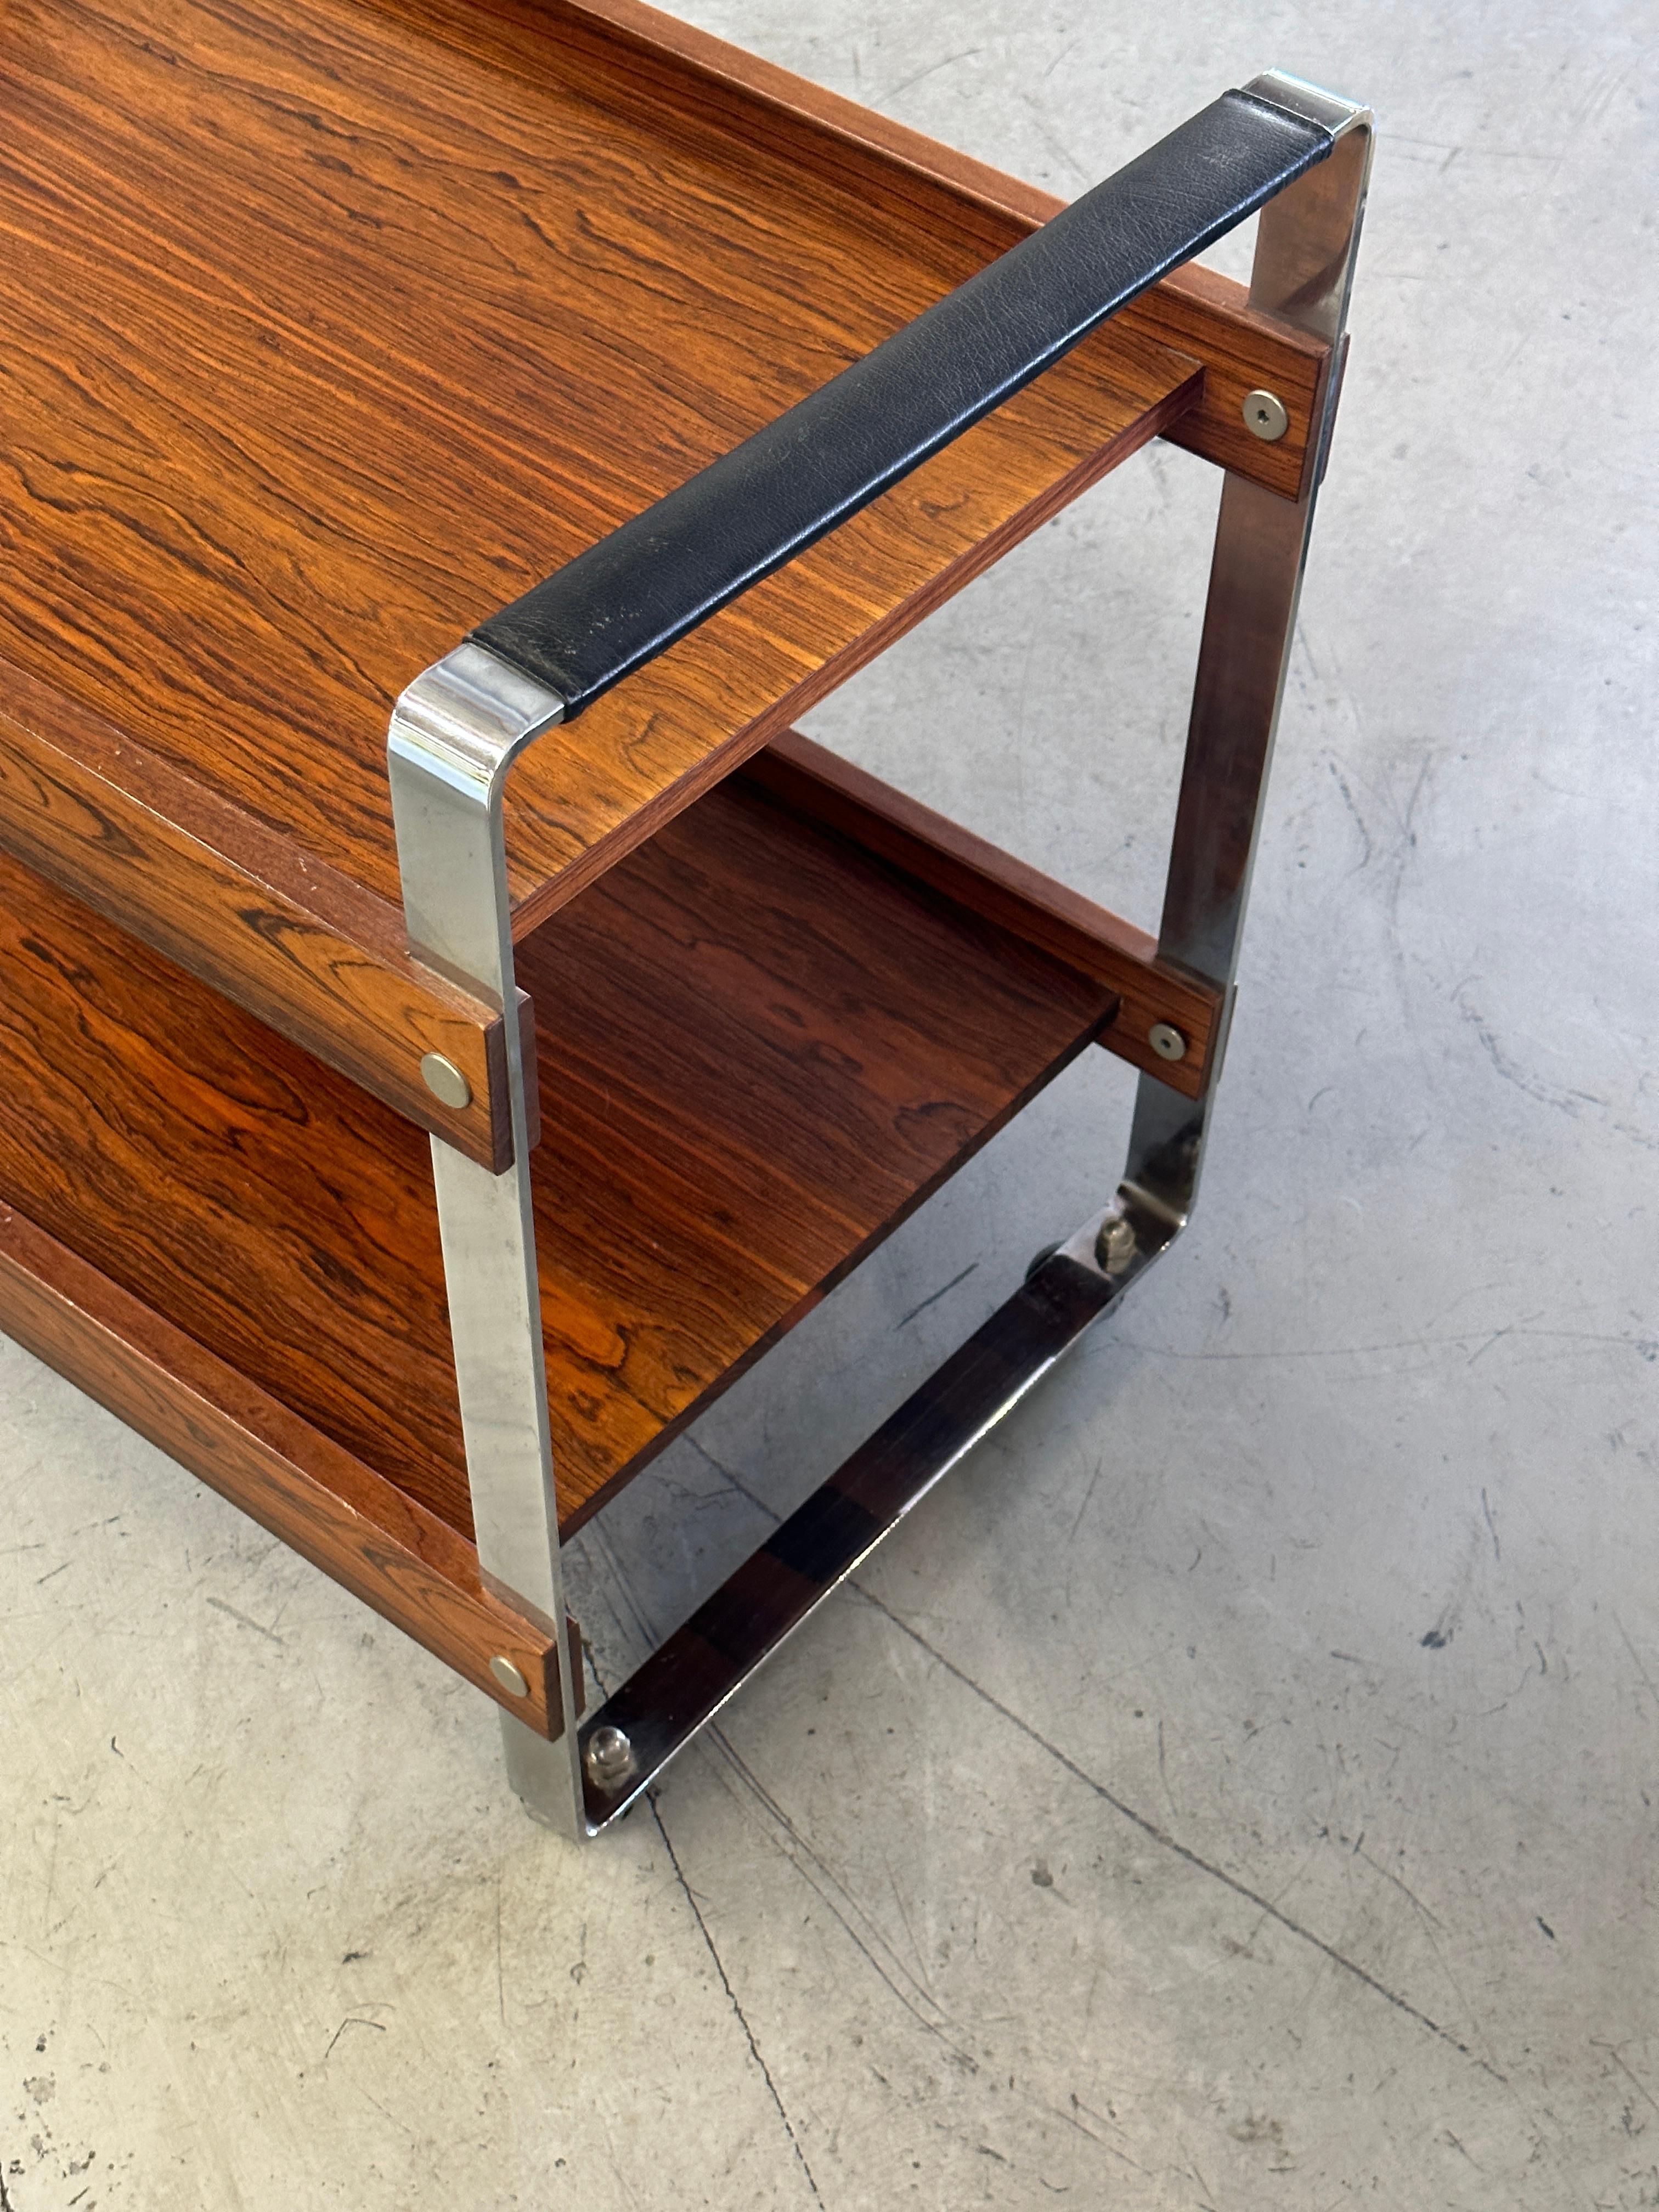 A pretty rosewood and chrome designed by Richard Young for Merrow Associates in the 1960s. The bar is on 4 castors and glides smoothly. Beautiful graining to the wood. In good age appropriate condition although there is some minor lifting to the